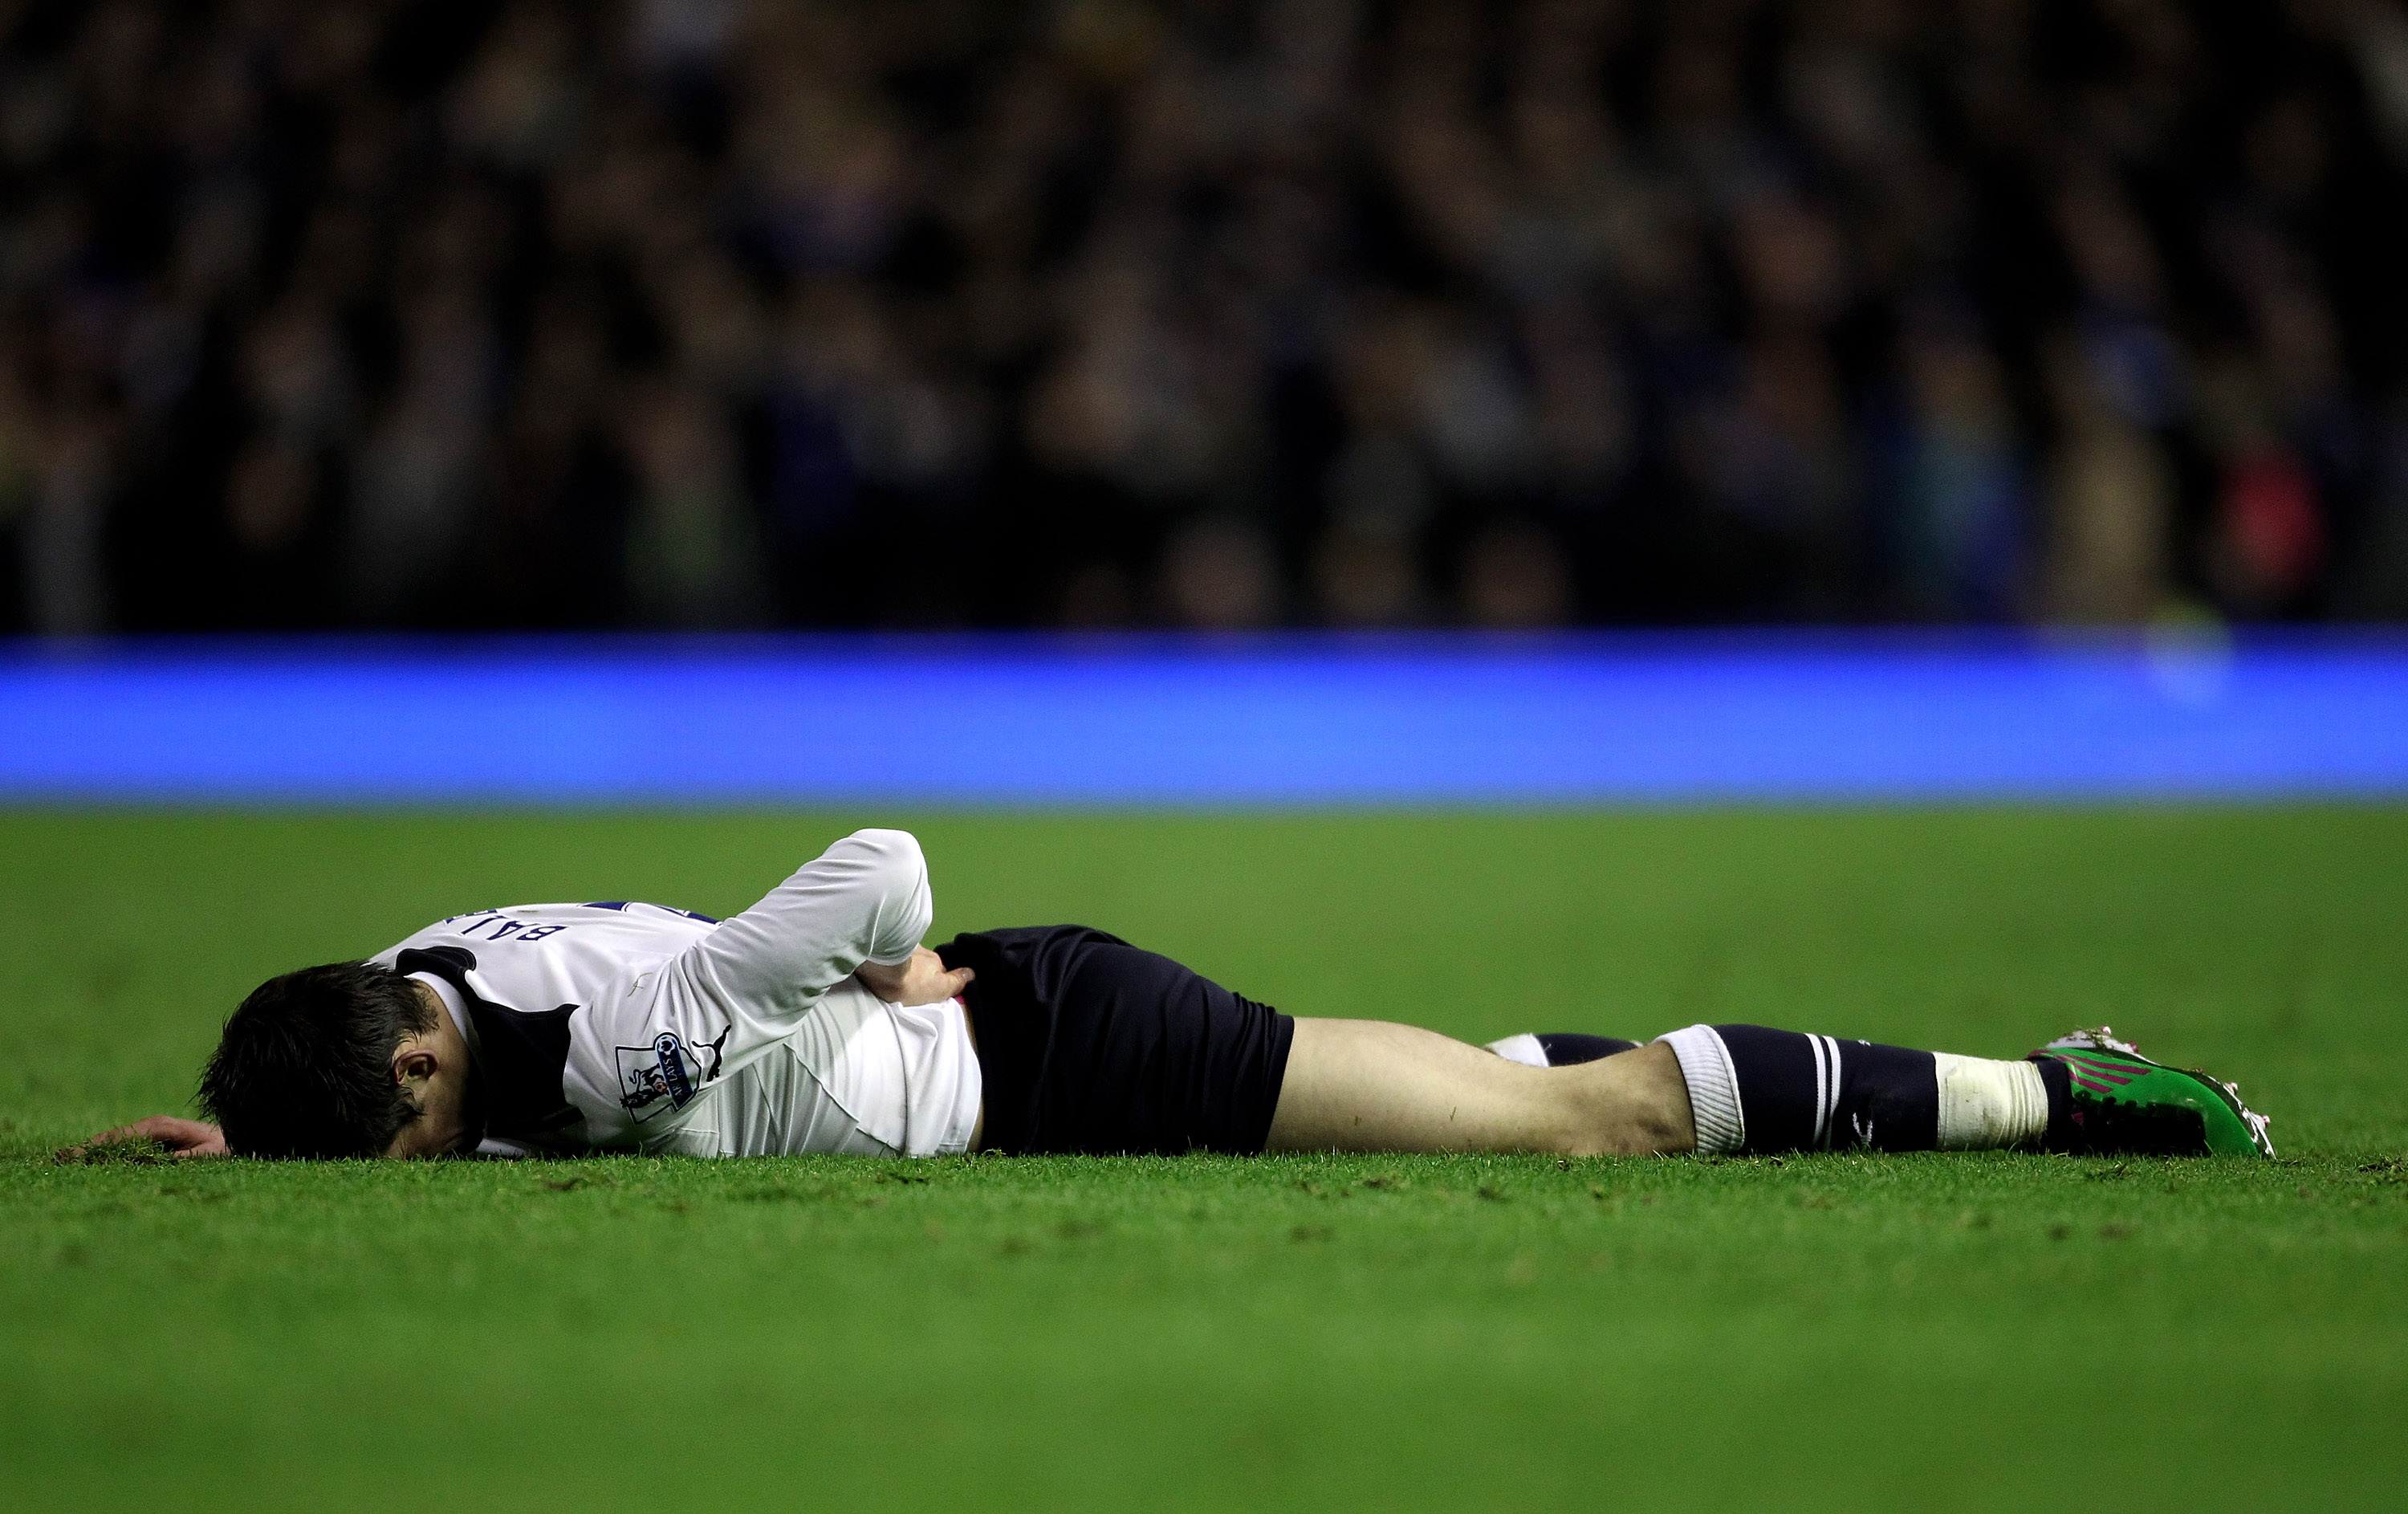 LIVERPOOL, ENGLAND - JANUARY 05:   Gareth Bale of Tottenham Hotspur lies injured during the Barclays Premier League match between Everton and Tottenham Hotspur at Goodison Park on January 5, 2011 in Liverpool, England. (Photo by Alex Livesey/Getty Images)